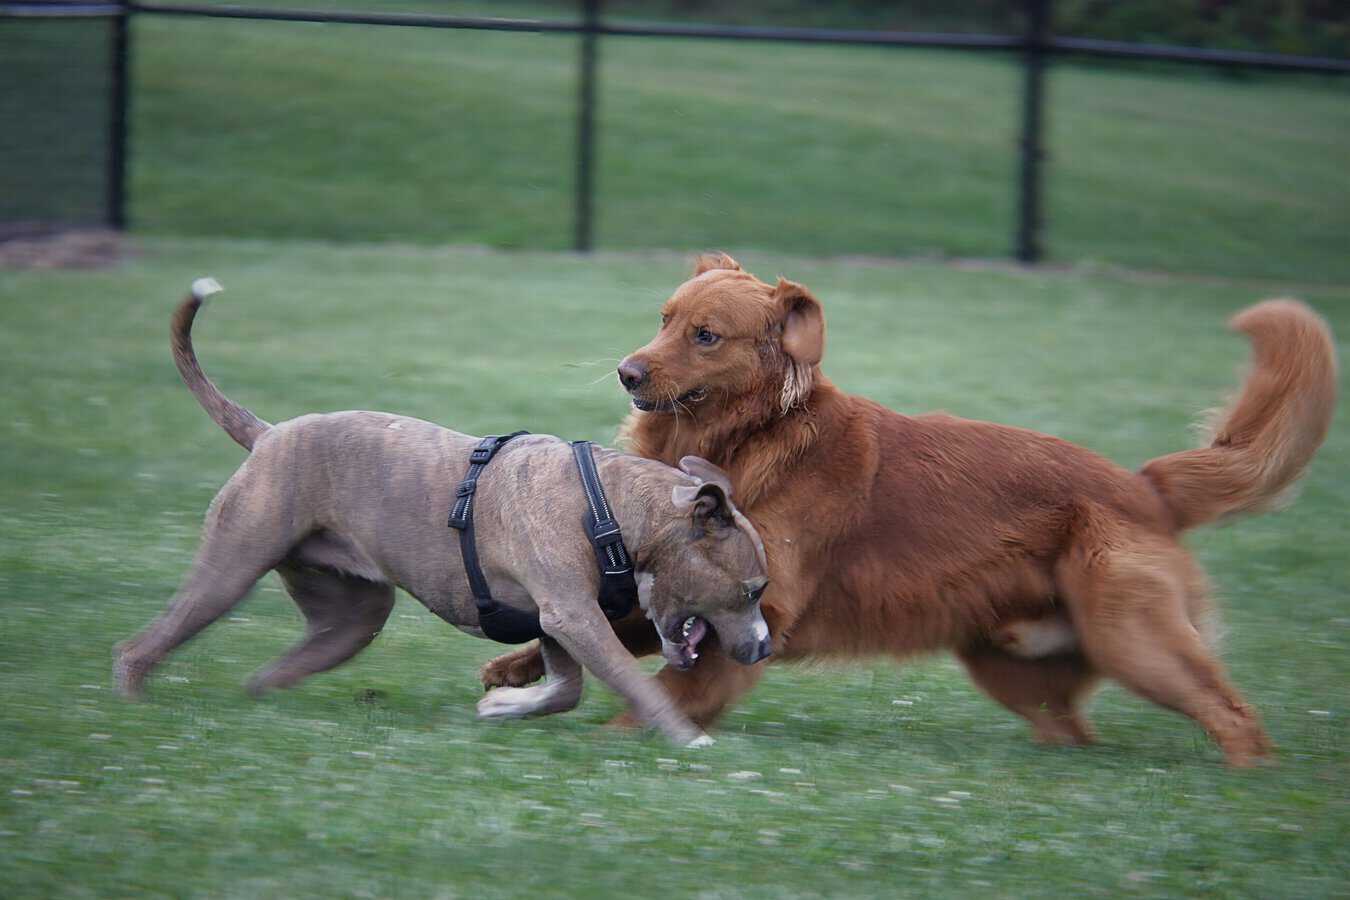 two large dogs playing in a fenced area.